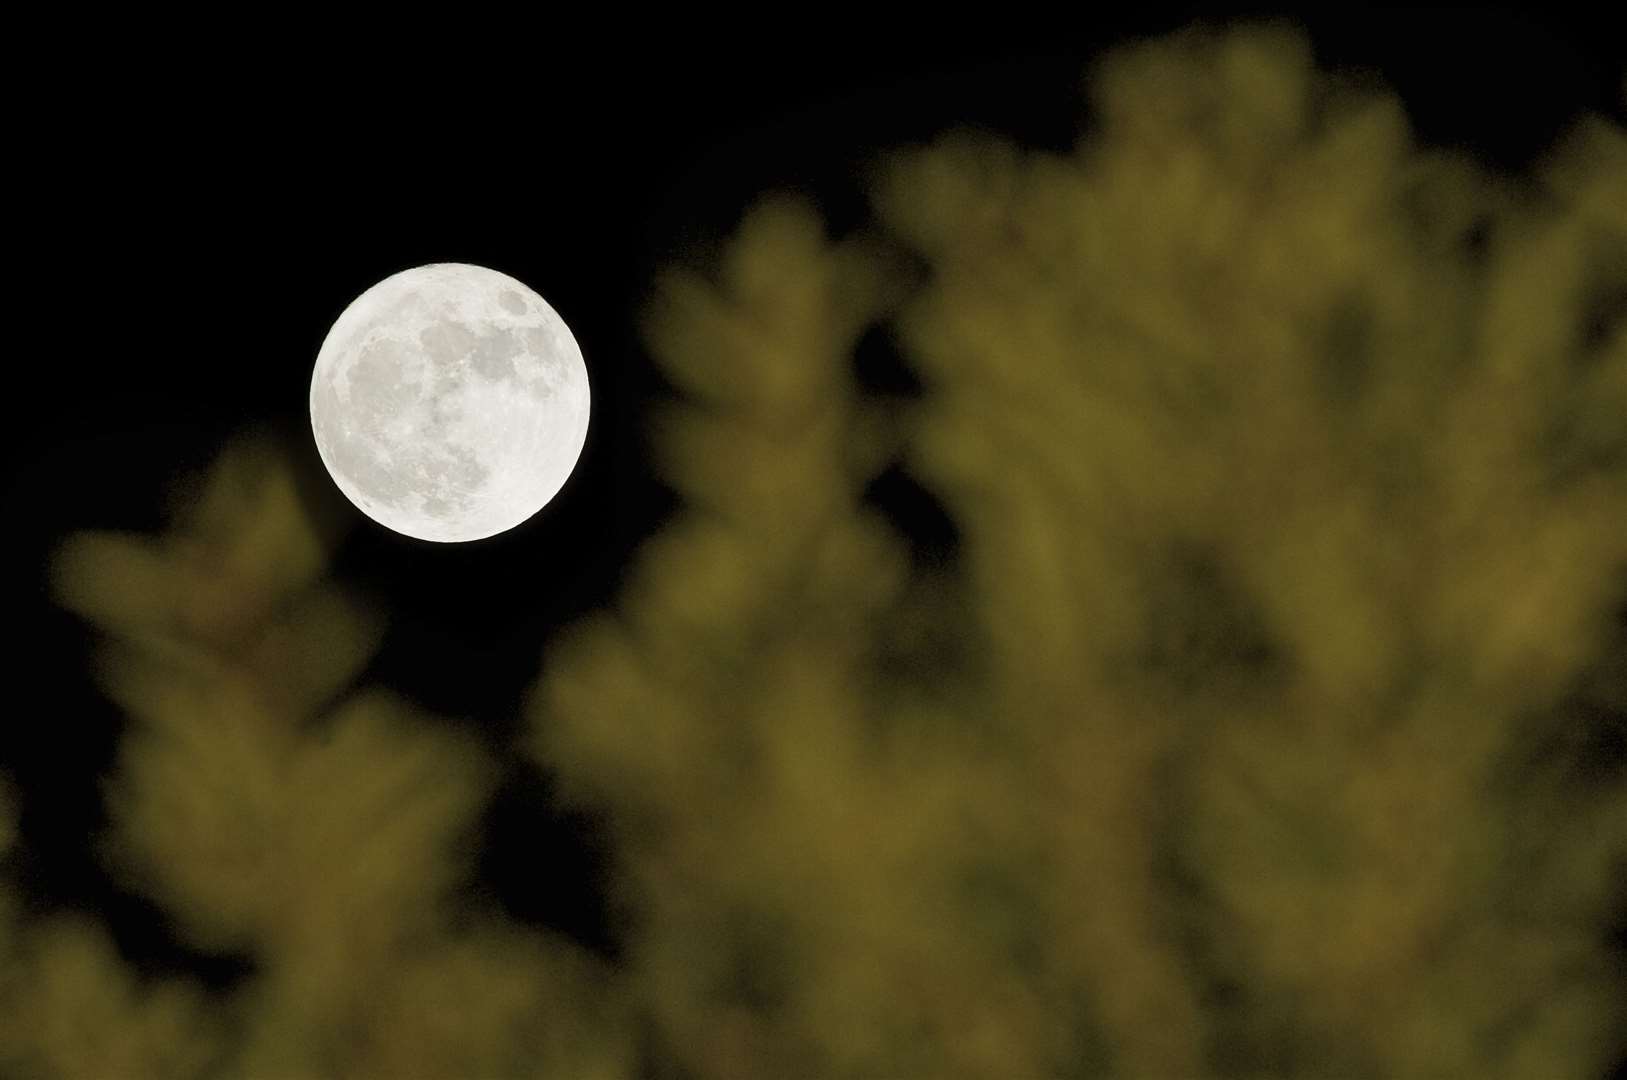 A Supermoon is happening for the first time this year.